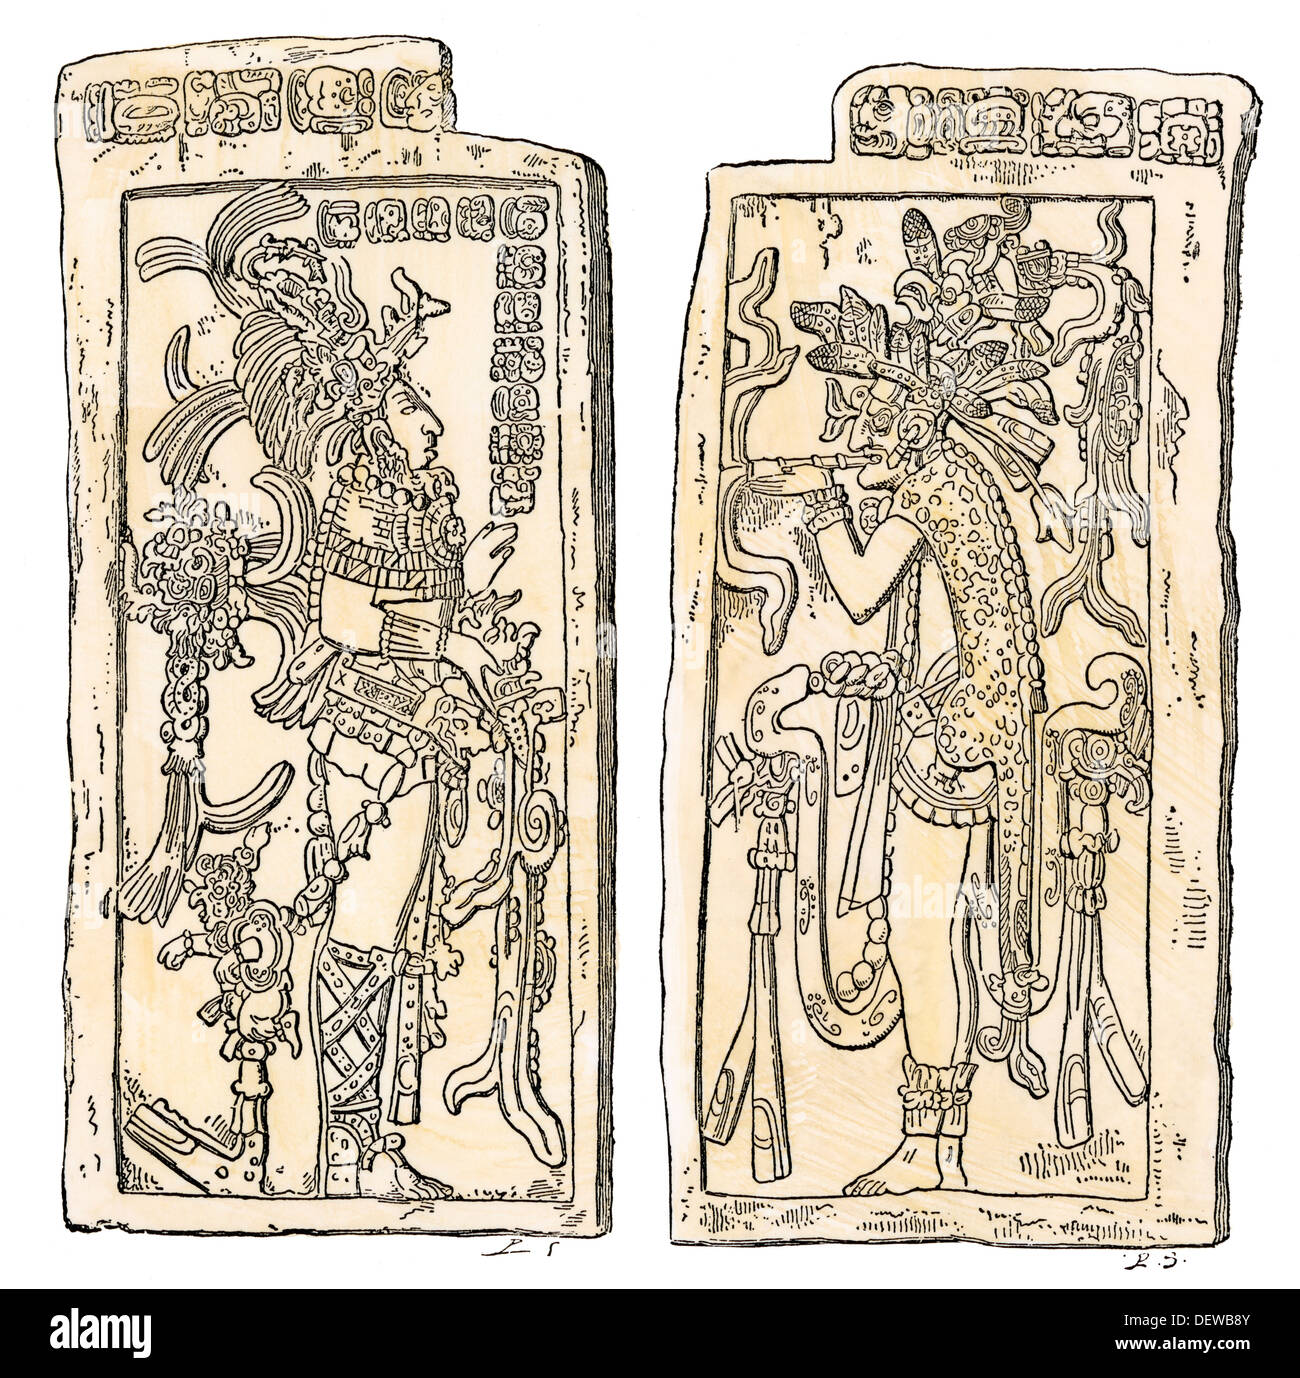 Mayan bas-relief sculptures from Temple of the Cross, Palenque, Mexico. Hand-colored woodcut Stock Photo